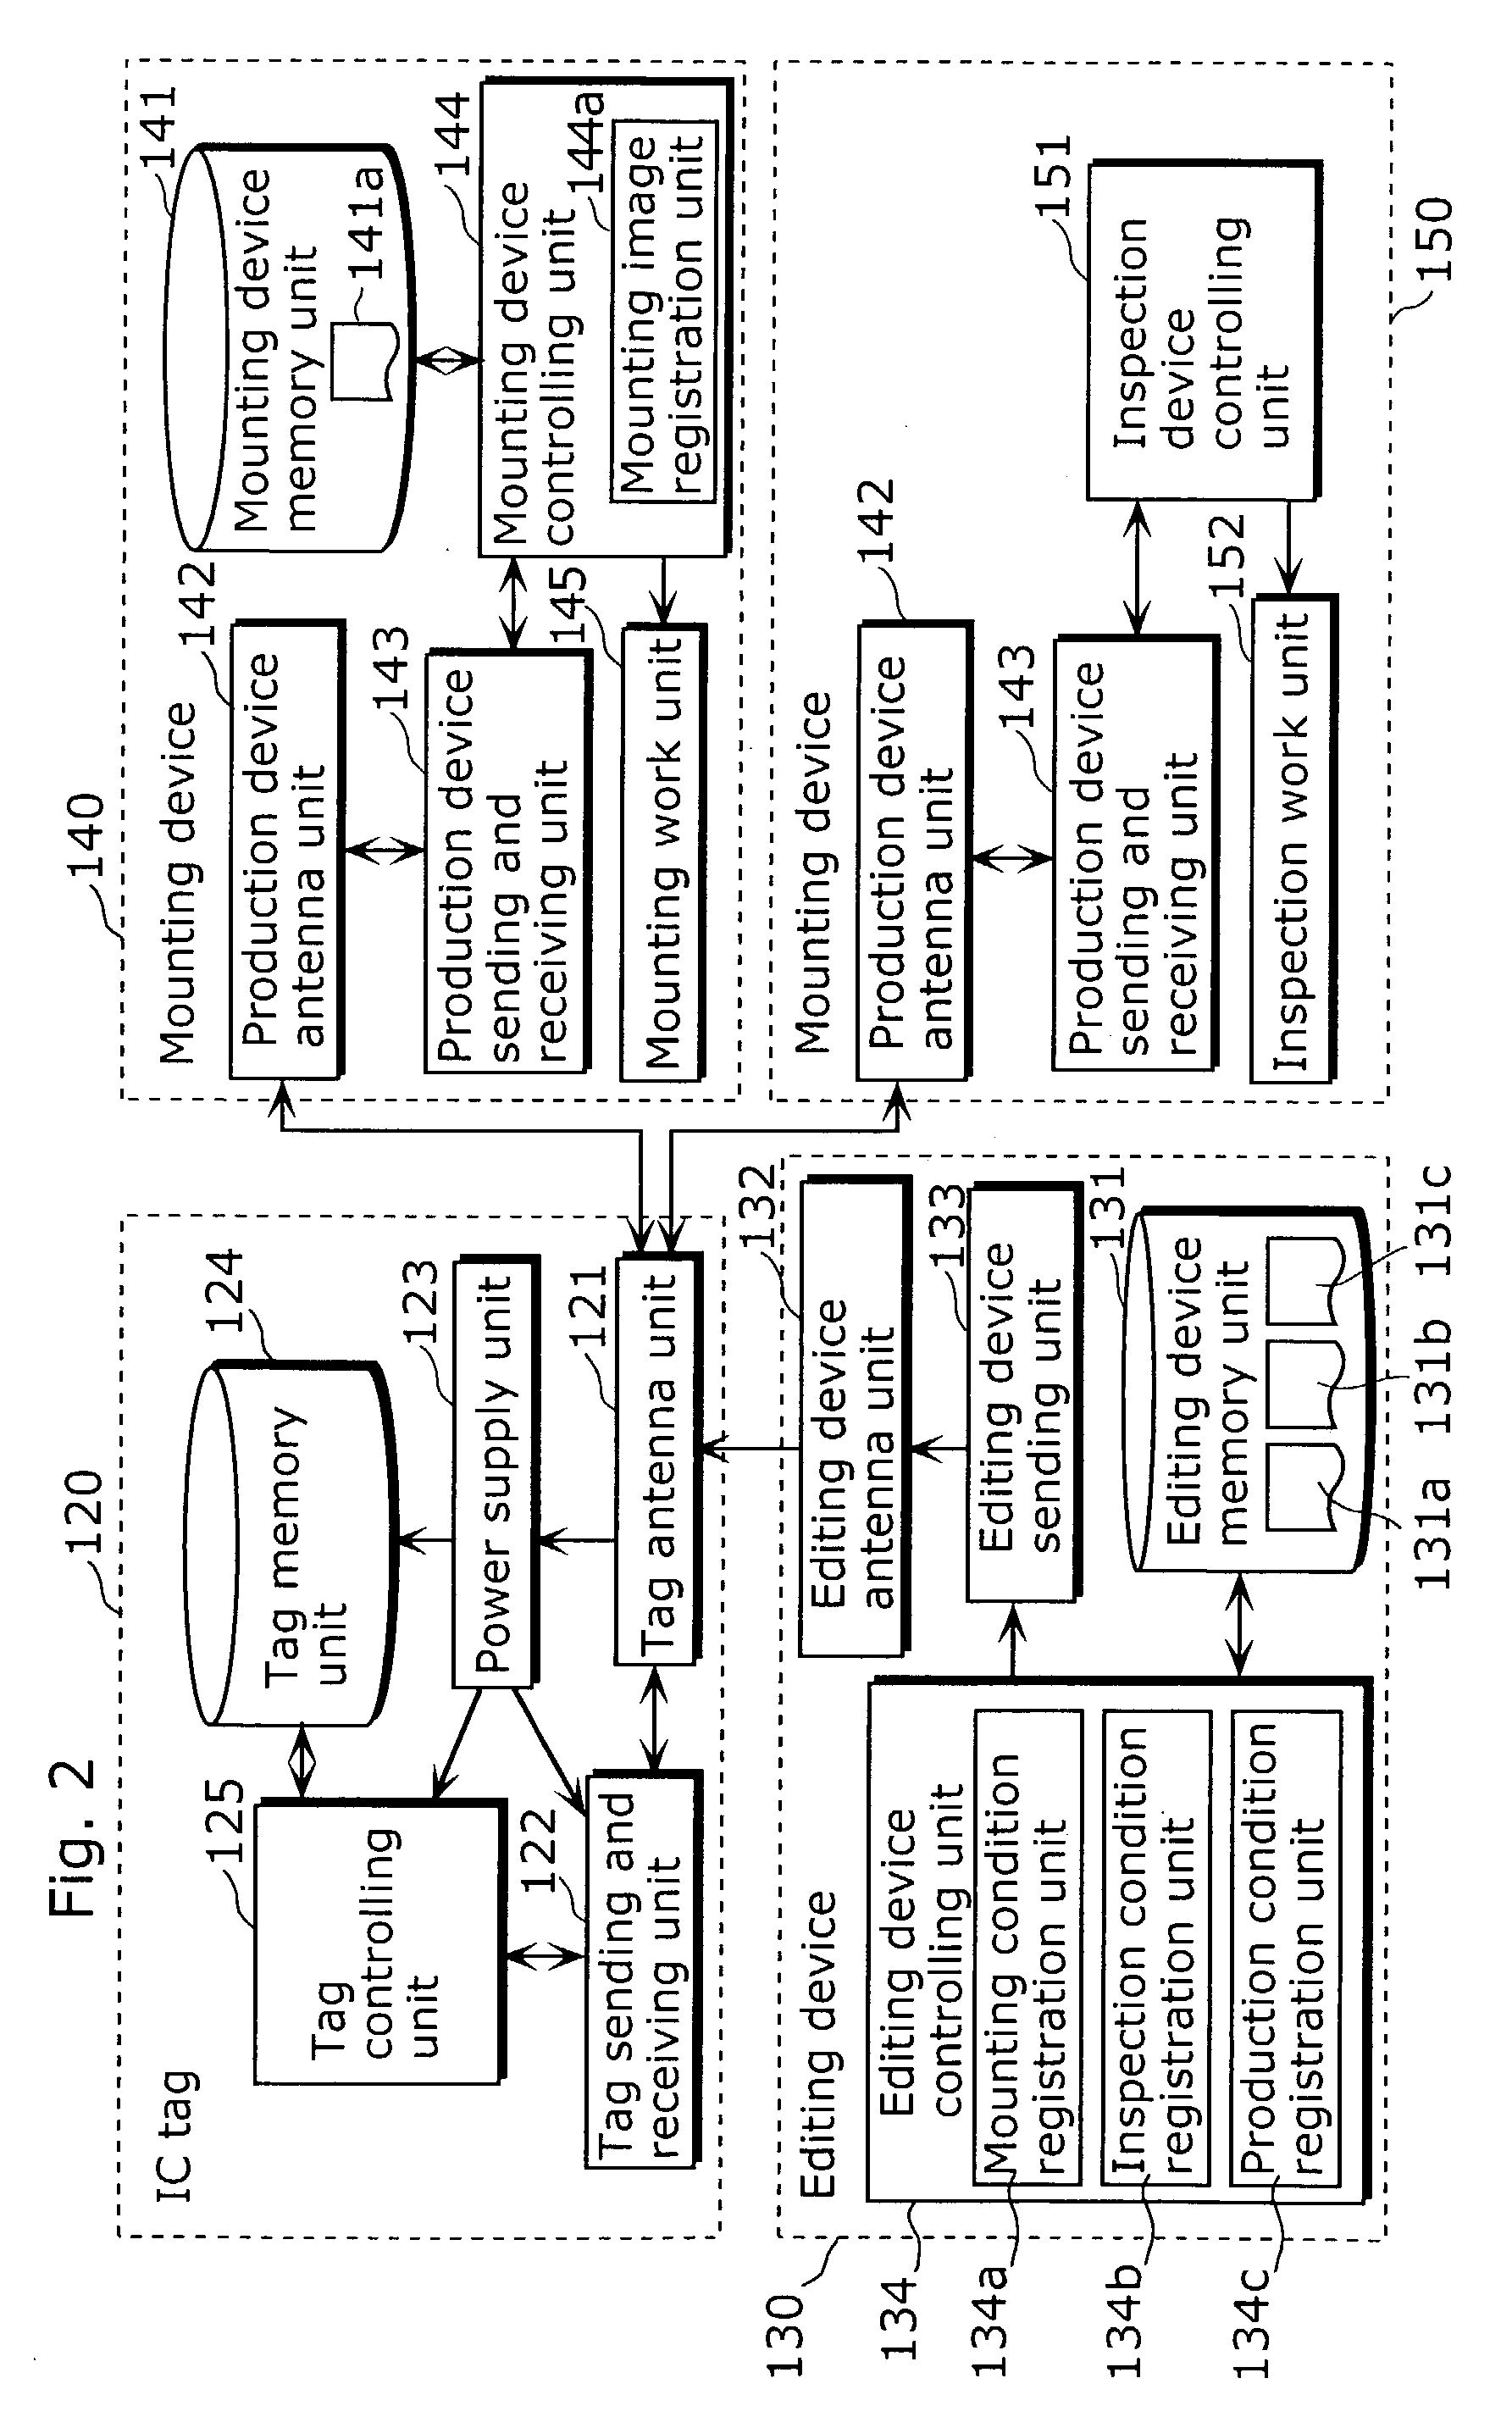 Production system and production method